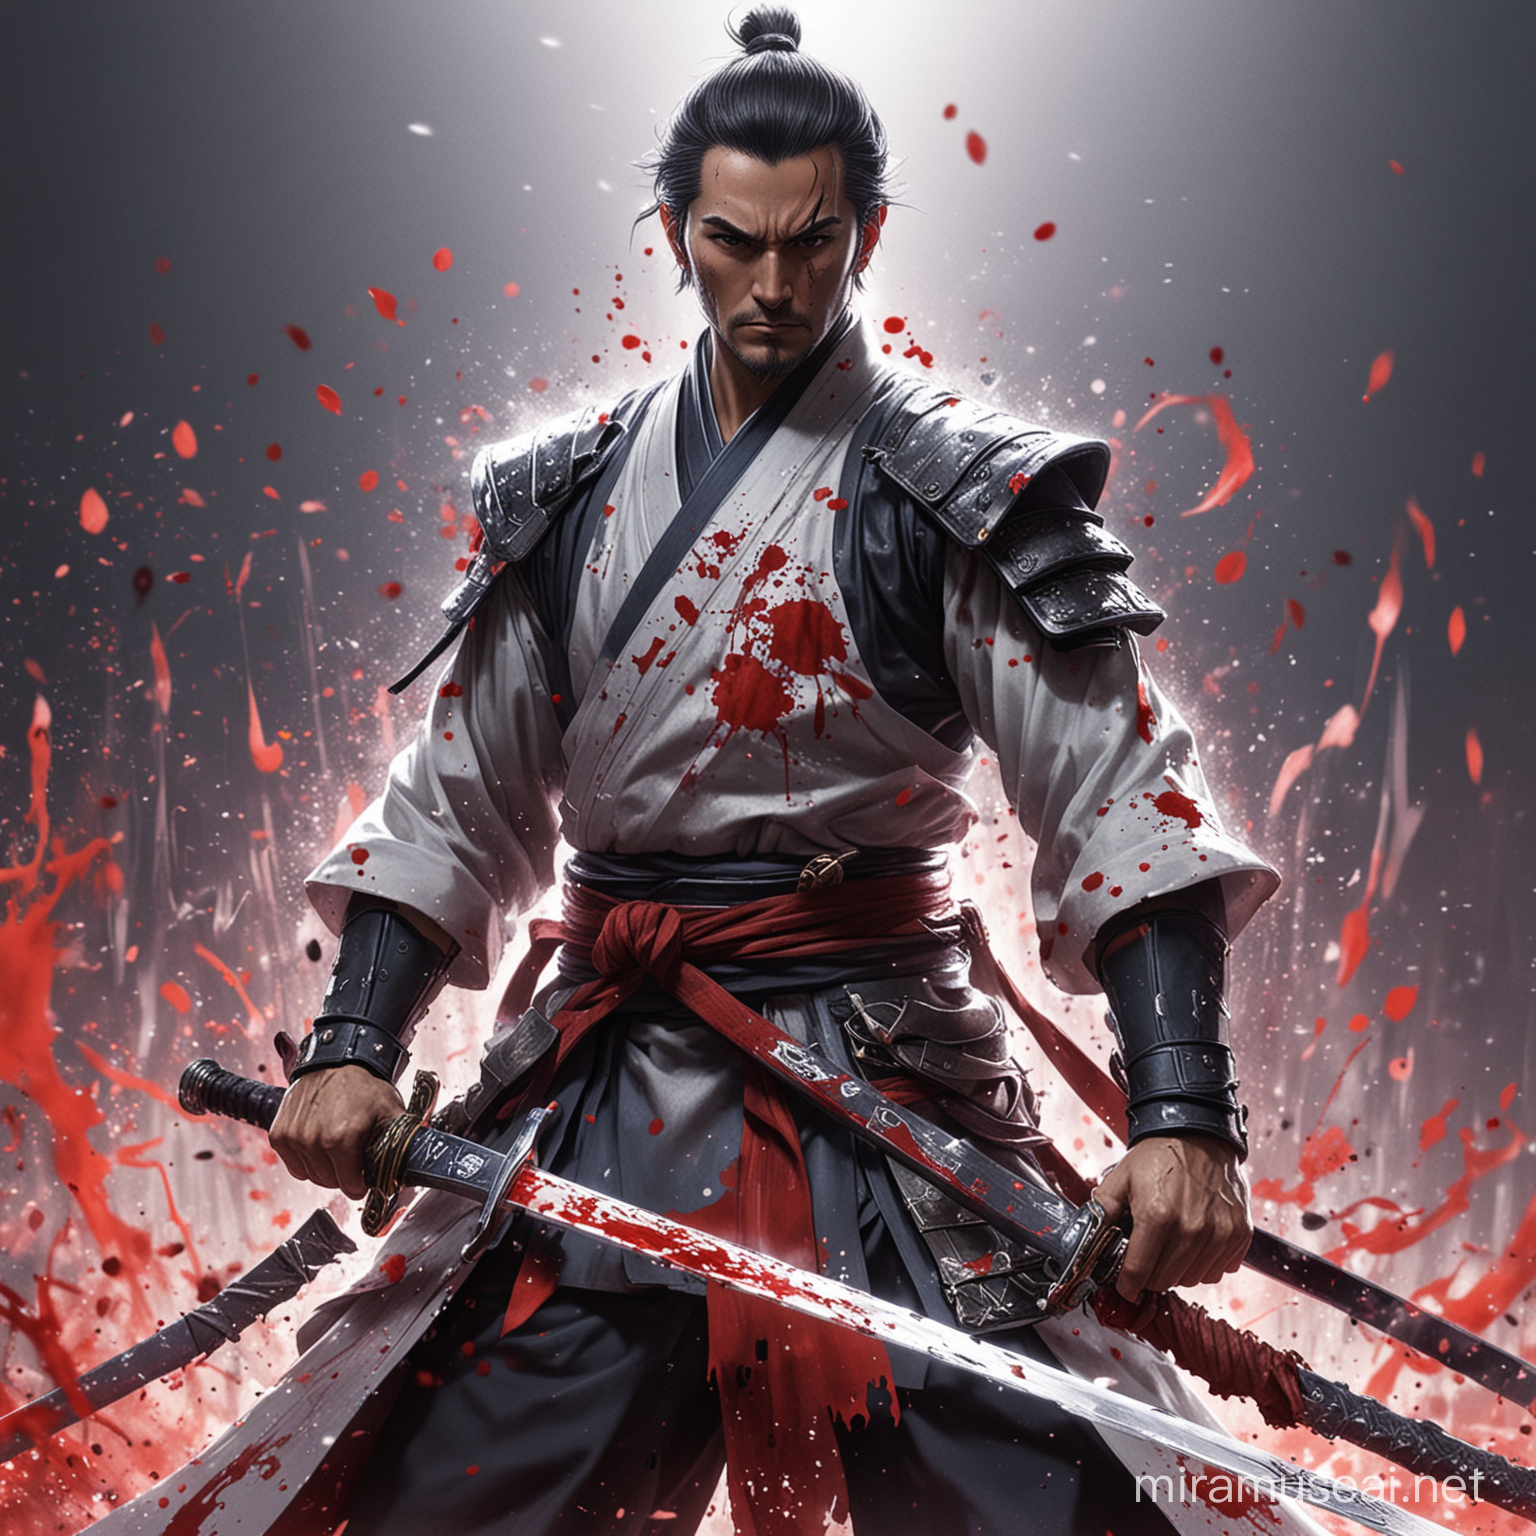 Toji Anime Character with Bloodied Sword